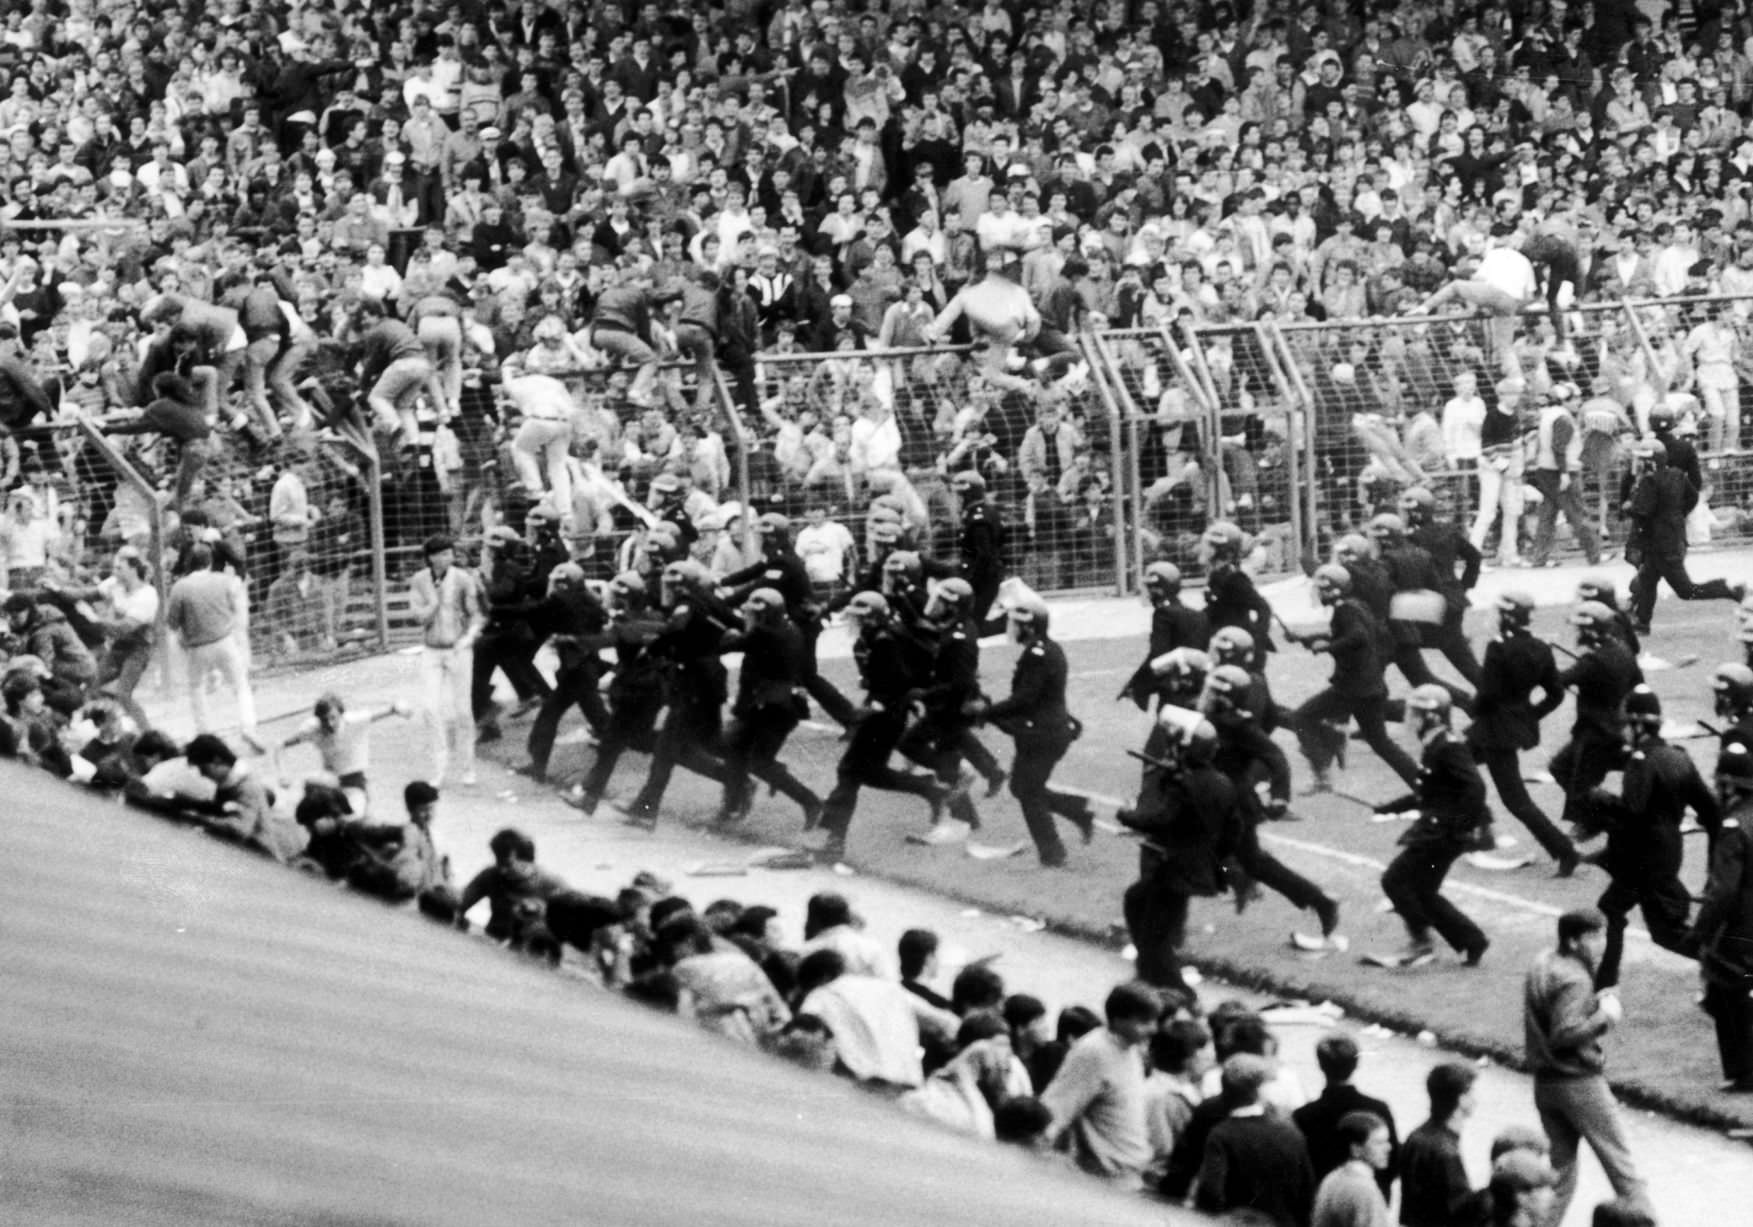 After getting organized, the police attack the football hooligans who started the riot on the pitch of a game between Birmingham City and Leeds United in Birmingham, England in 1985.